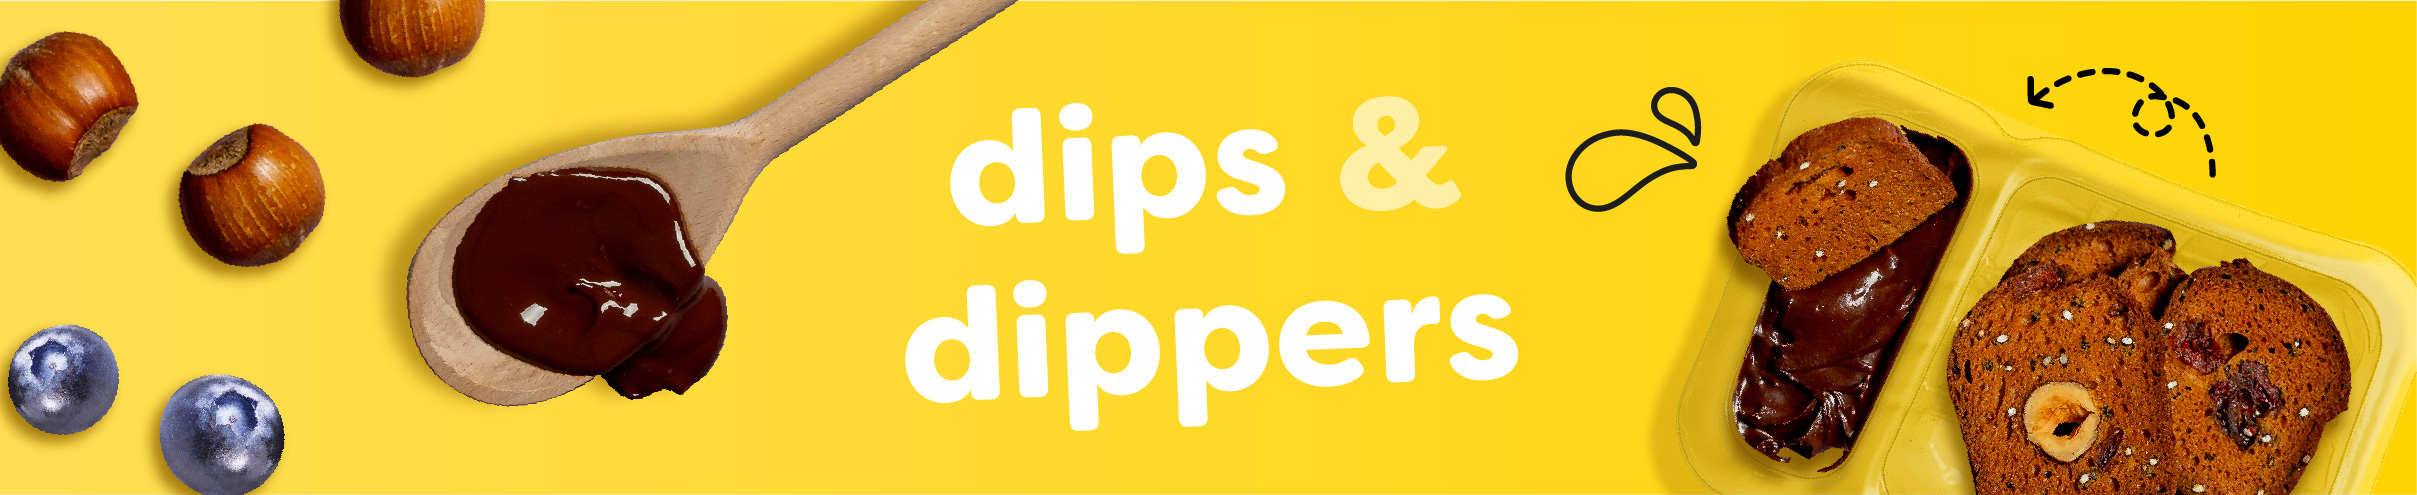 dips and dippers